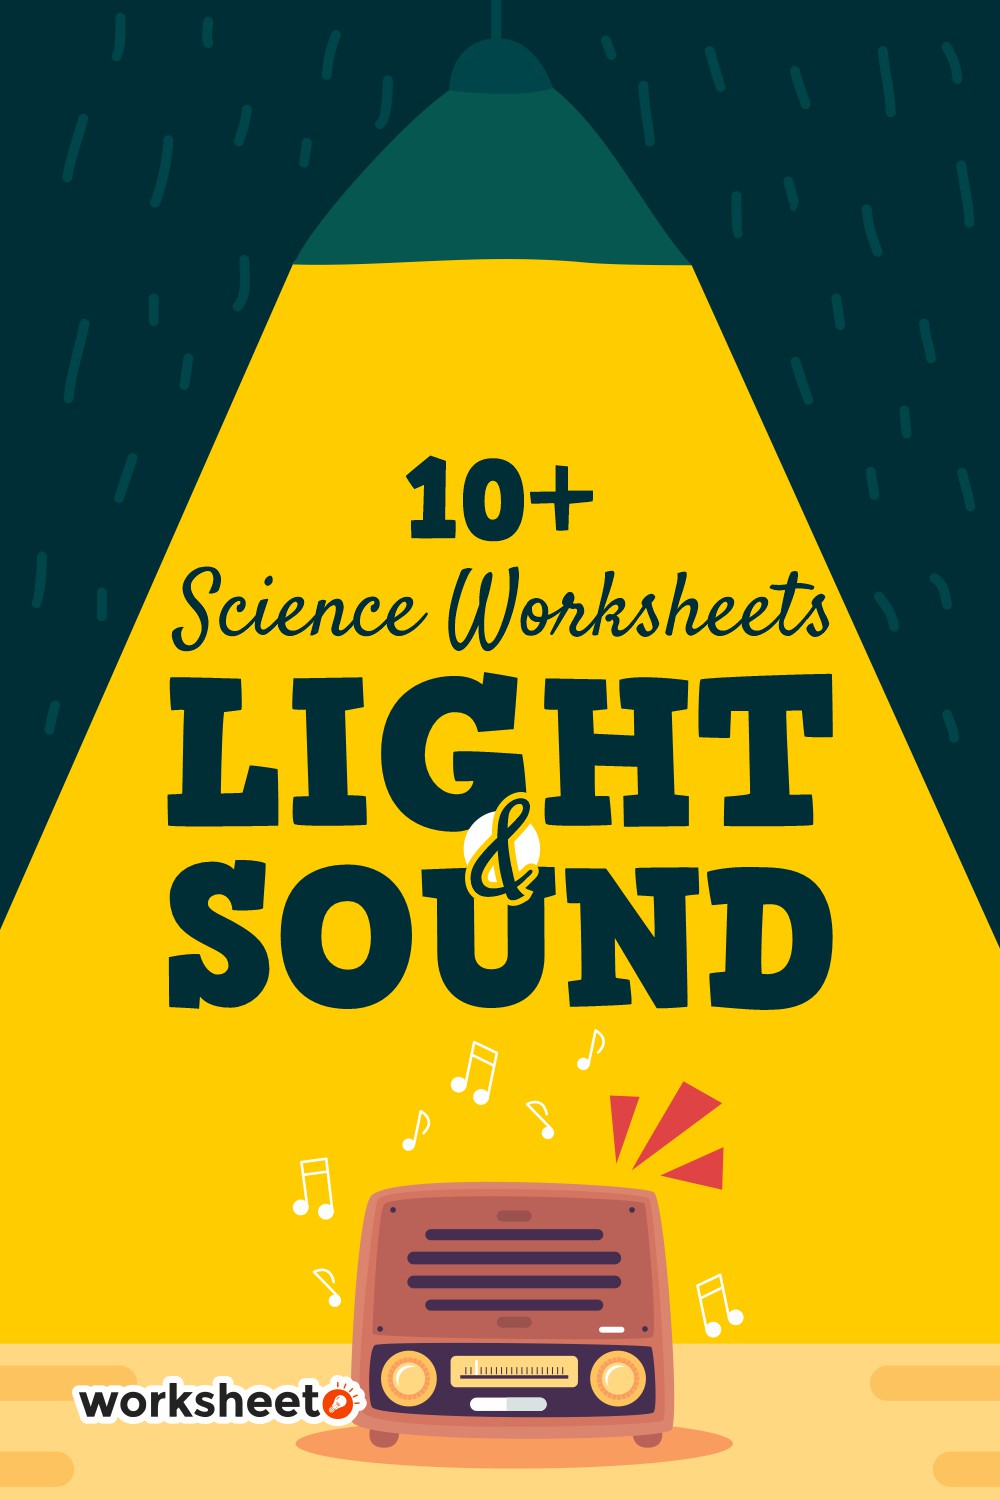 13 Images of Science Worksheets Light And Sound